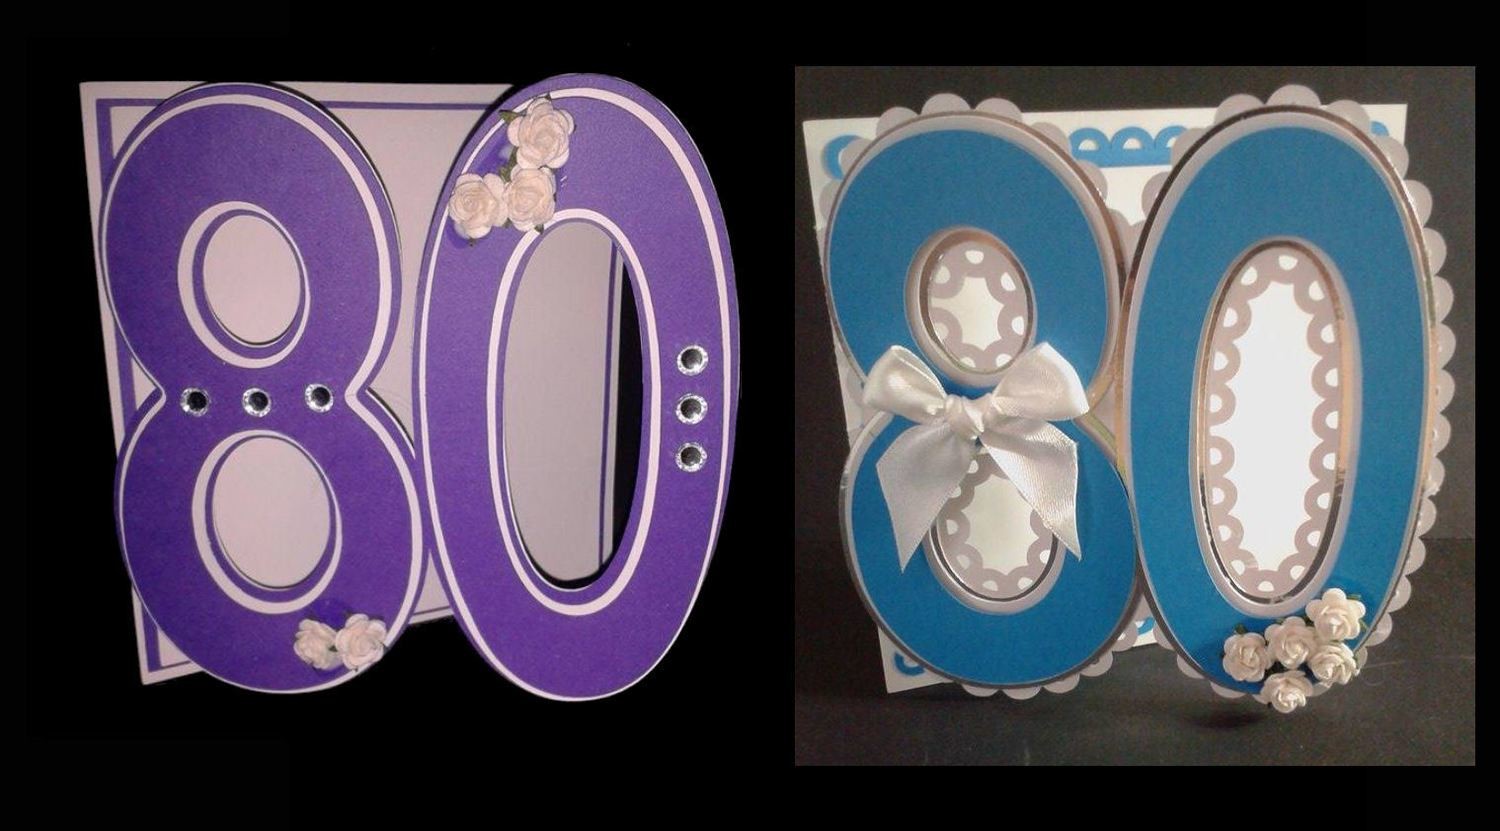 80th Shaped Card Templates x 2 cards (with layering)